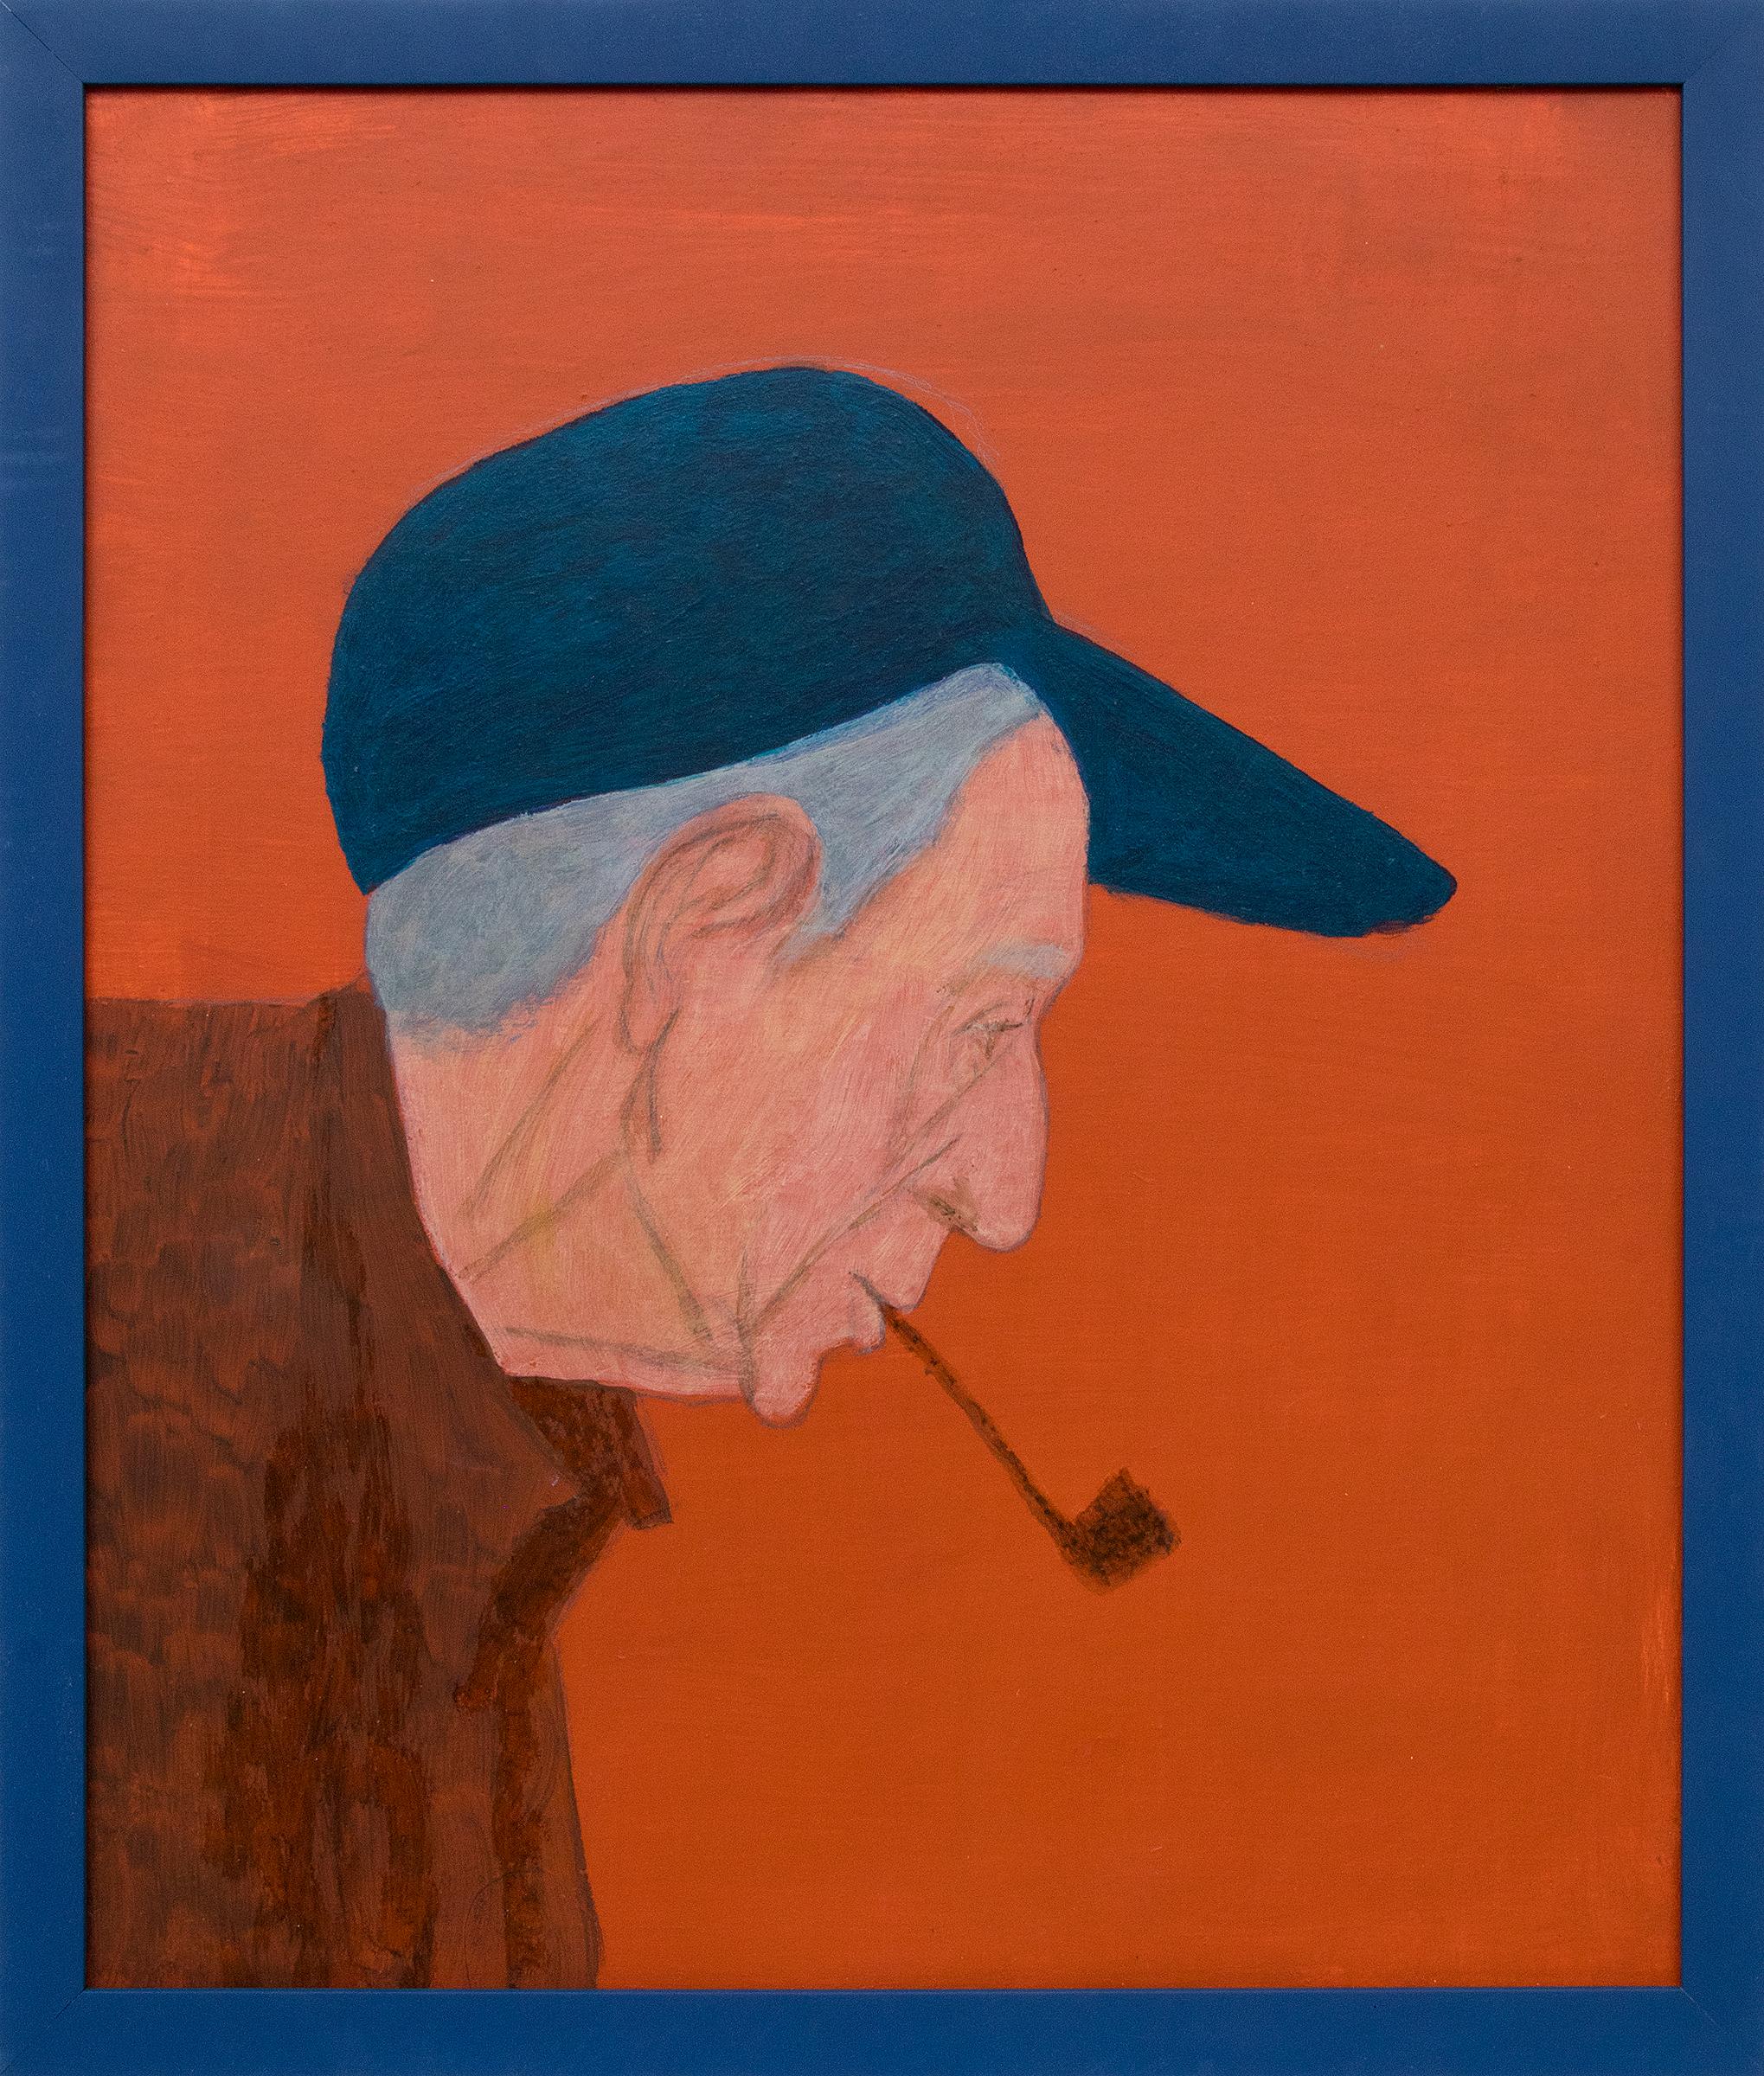 Portrait of a Man in Profile Smoking a Pipe, Orange, Blue, Brown, Gray